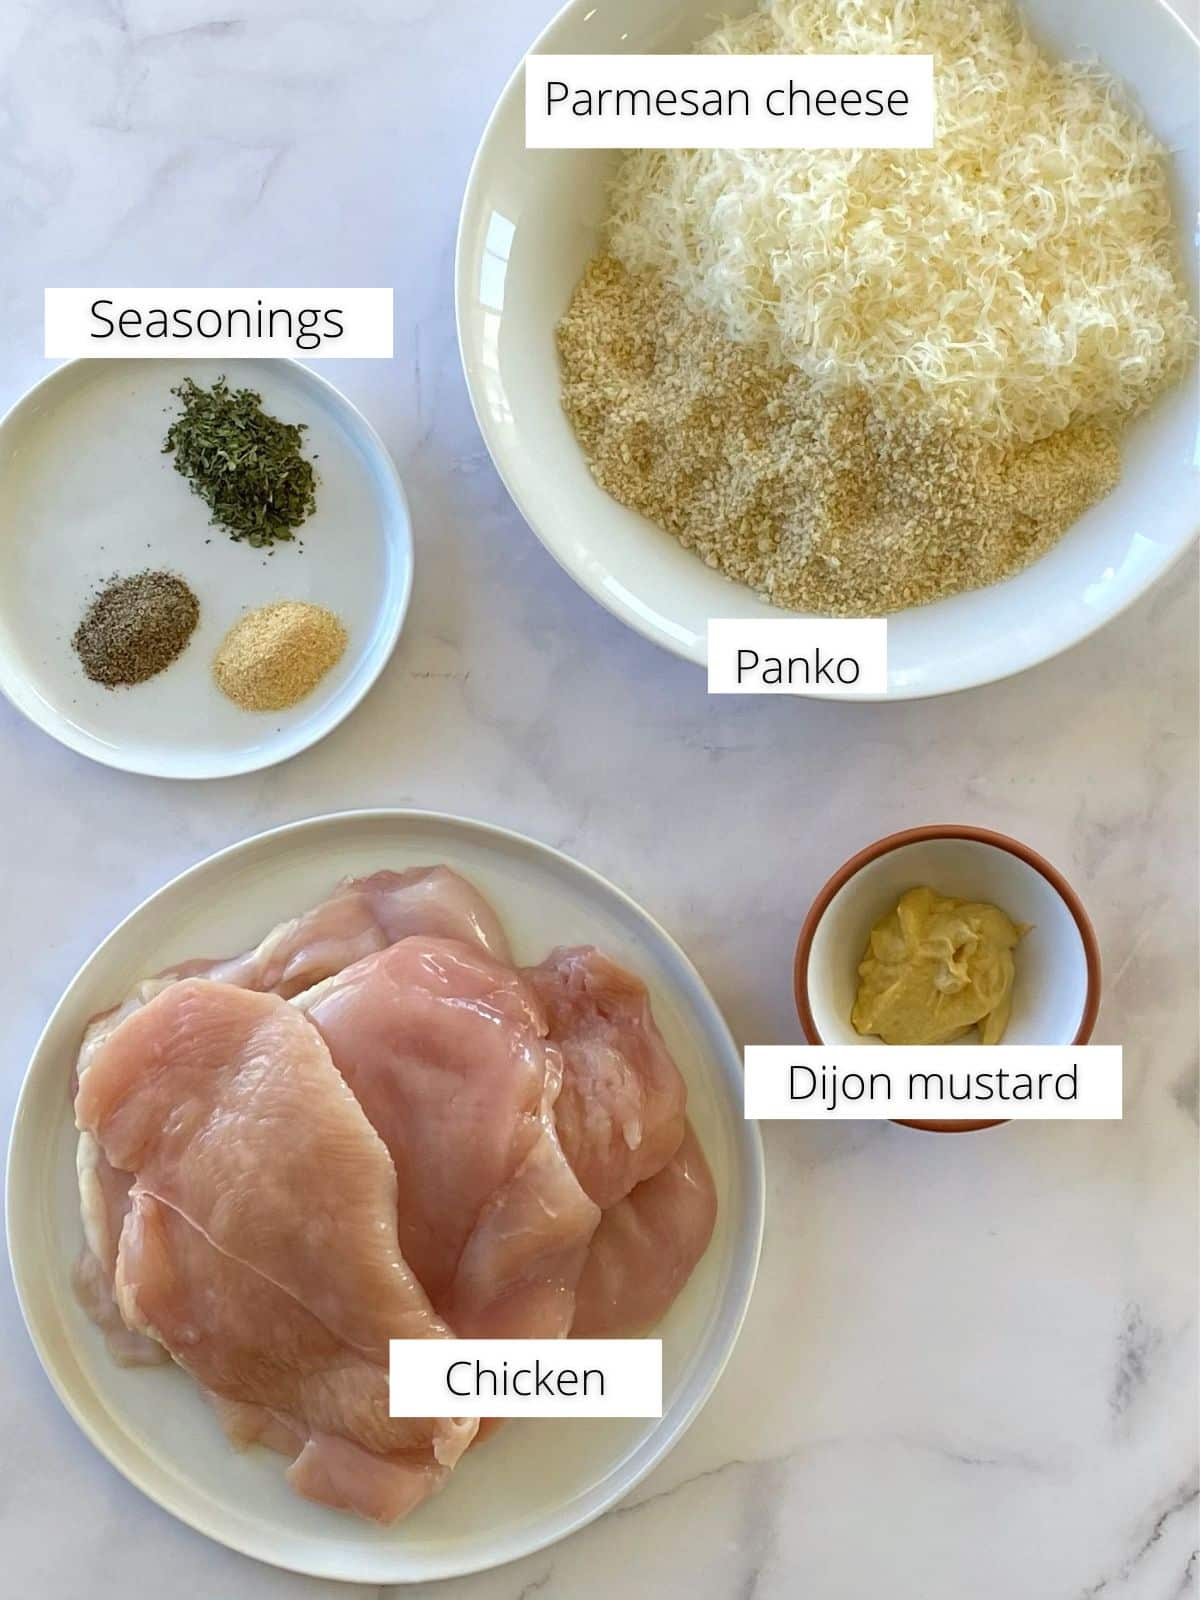 Ingredients for baked Parmesan crusted chicken cutlets.